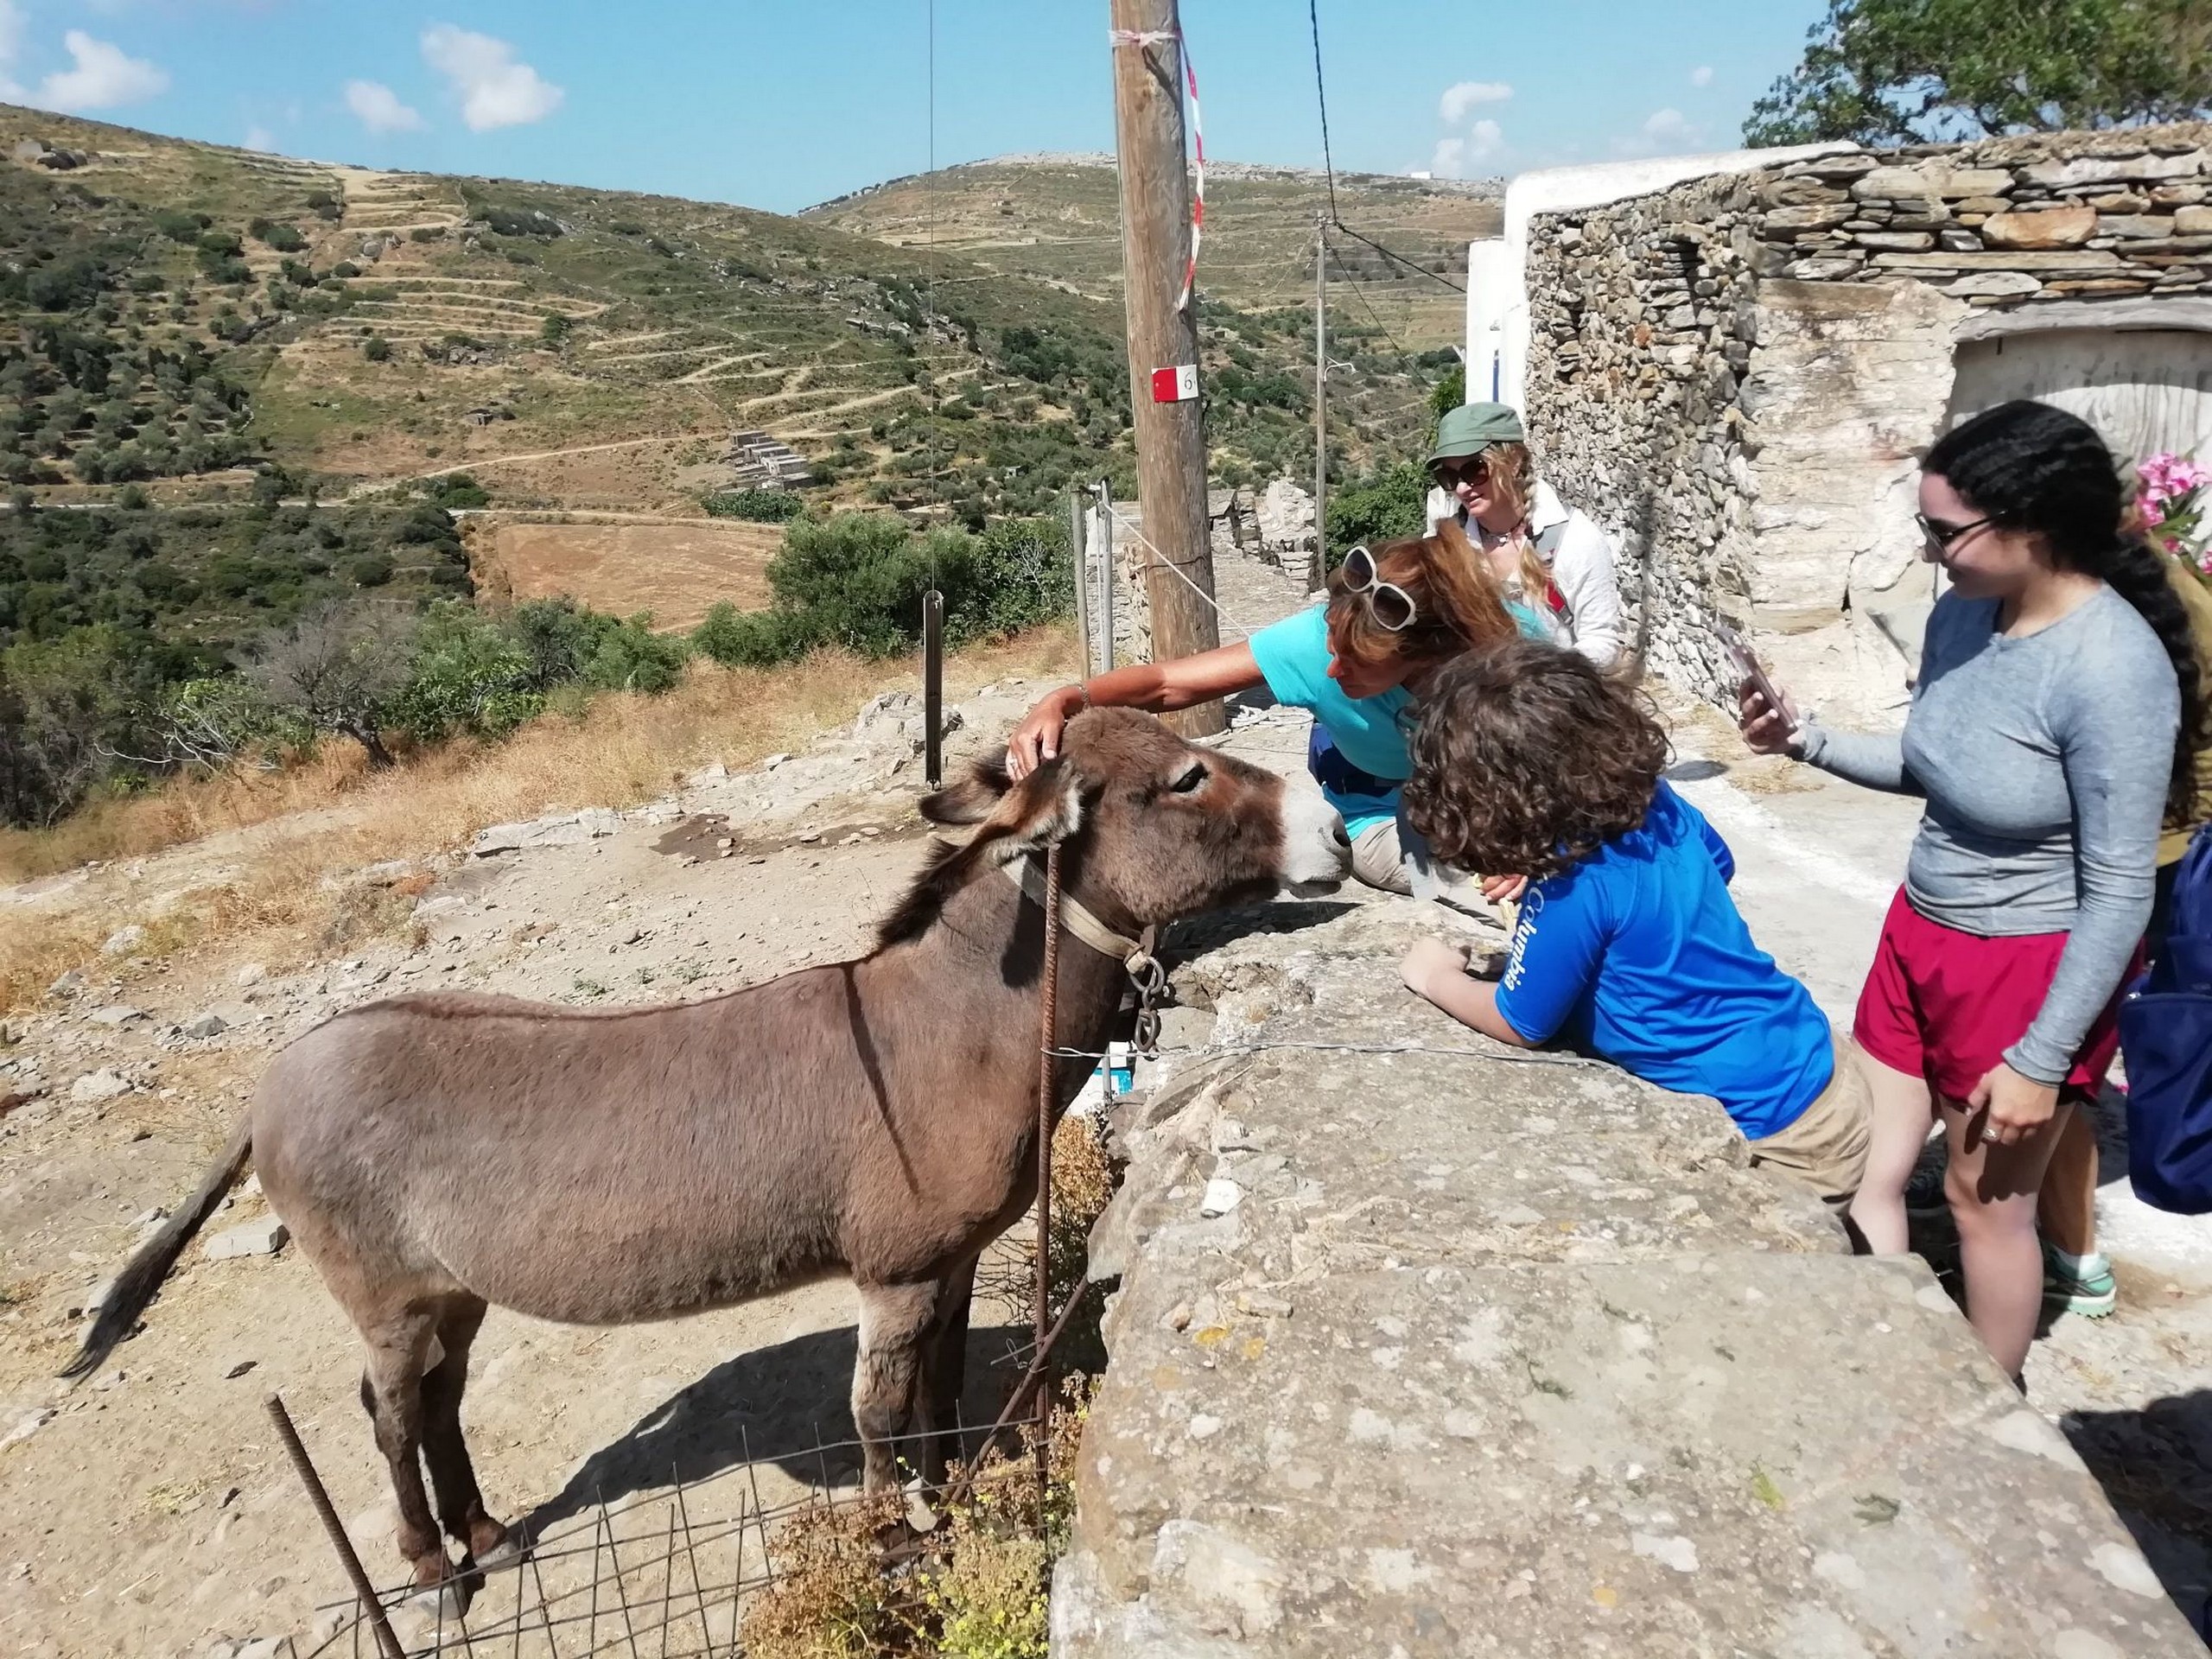 Petting a donkey while on a walking tour in Greece